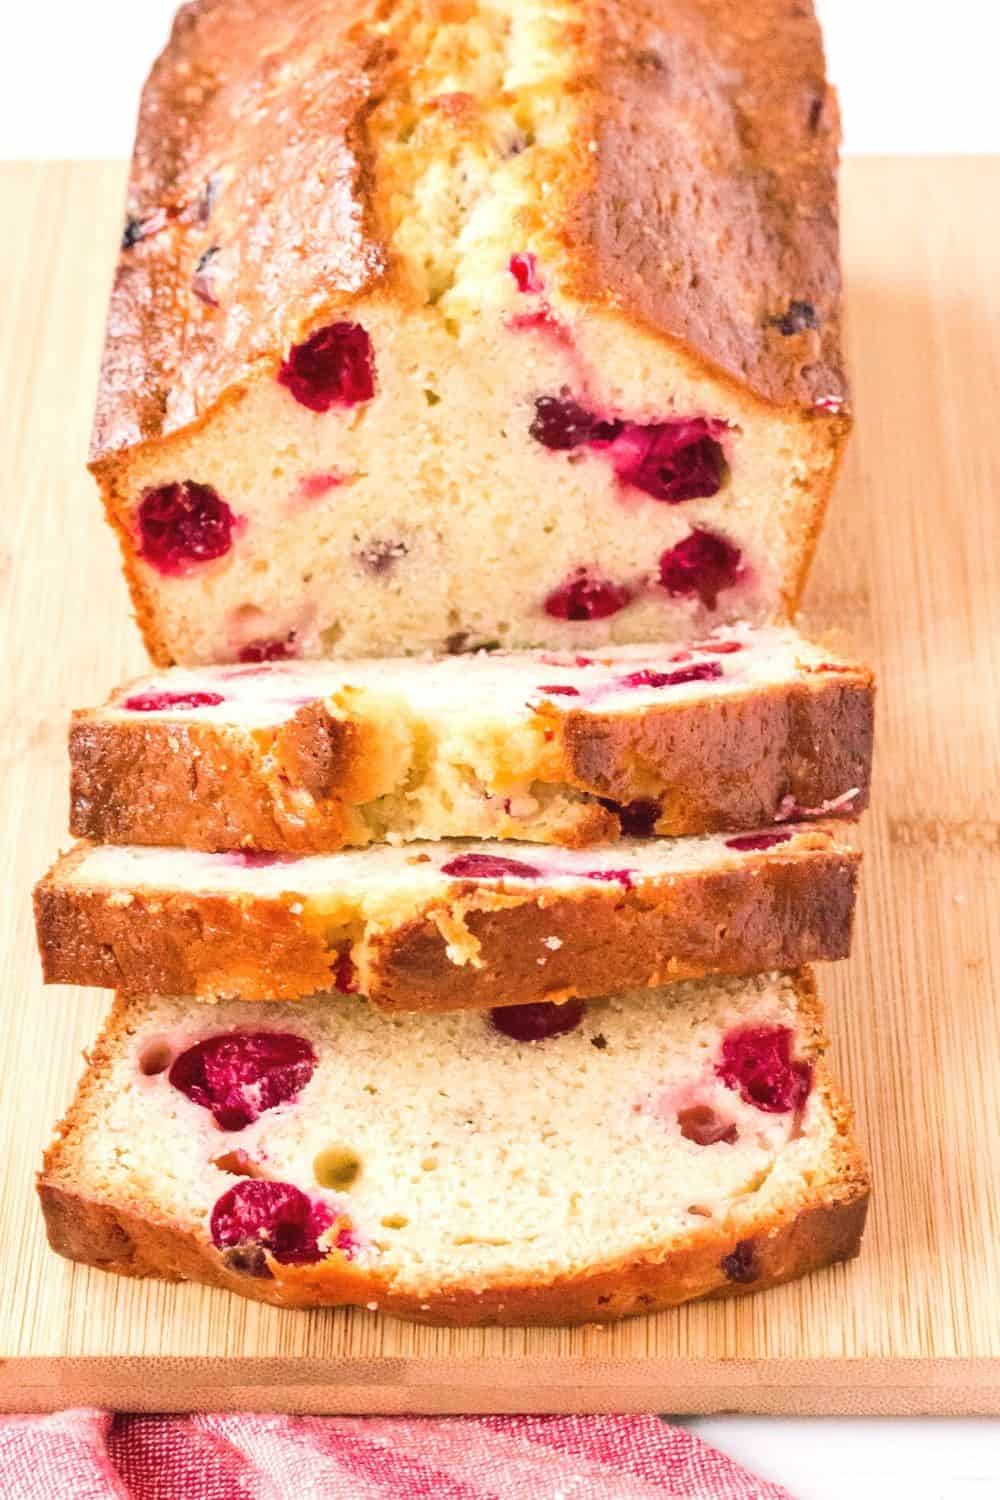 sliced loaf of banana bread with cranberries on a wooden cutting board